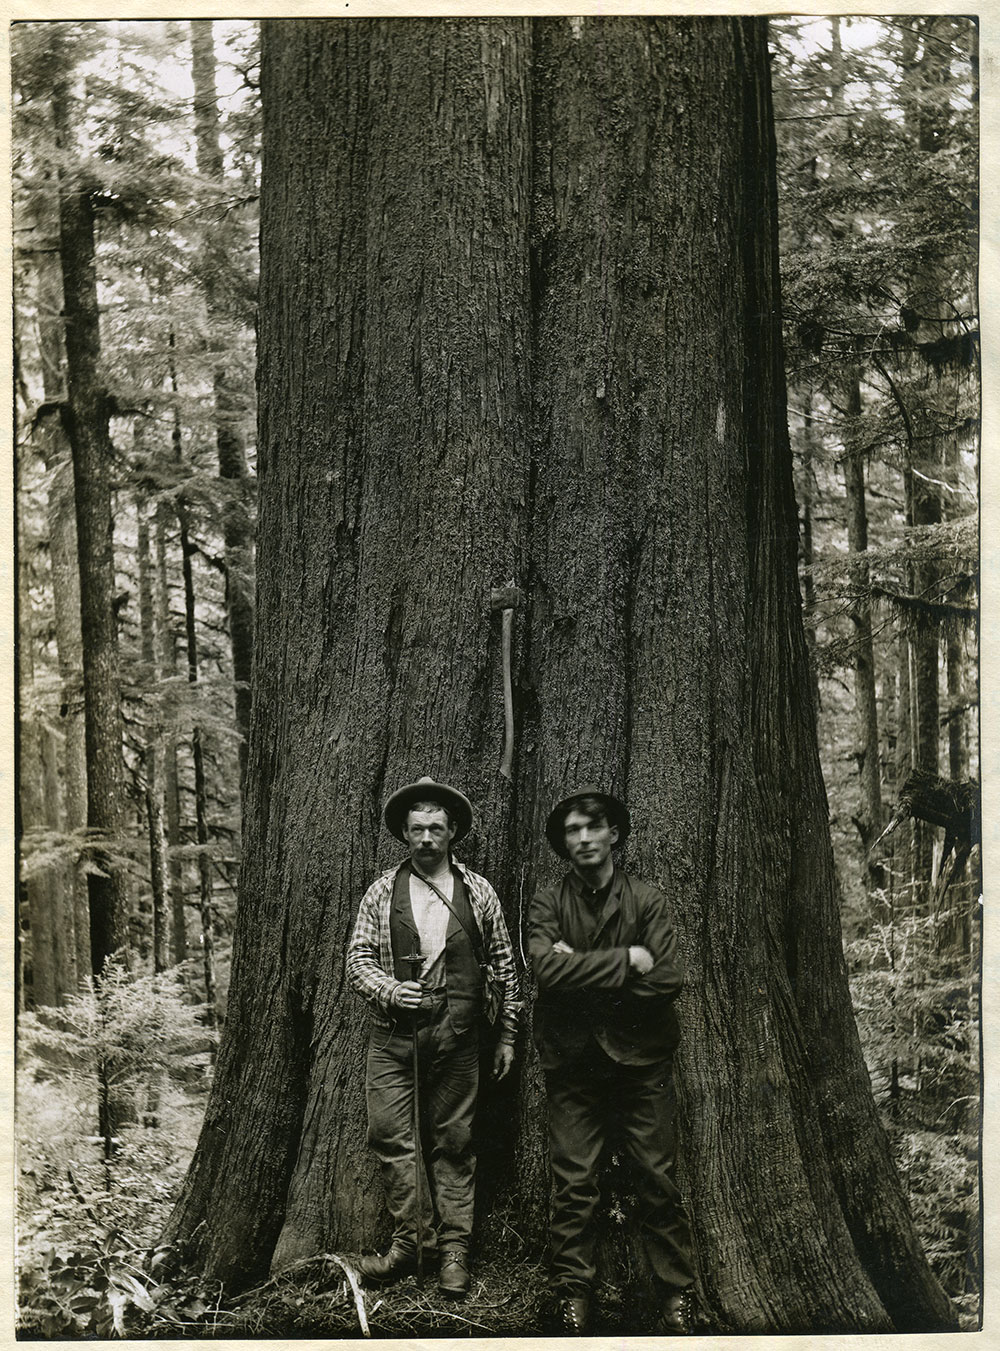 A black and white photo of two men in hats standing in front of a giant cedar tree in a large forest.